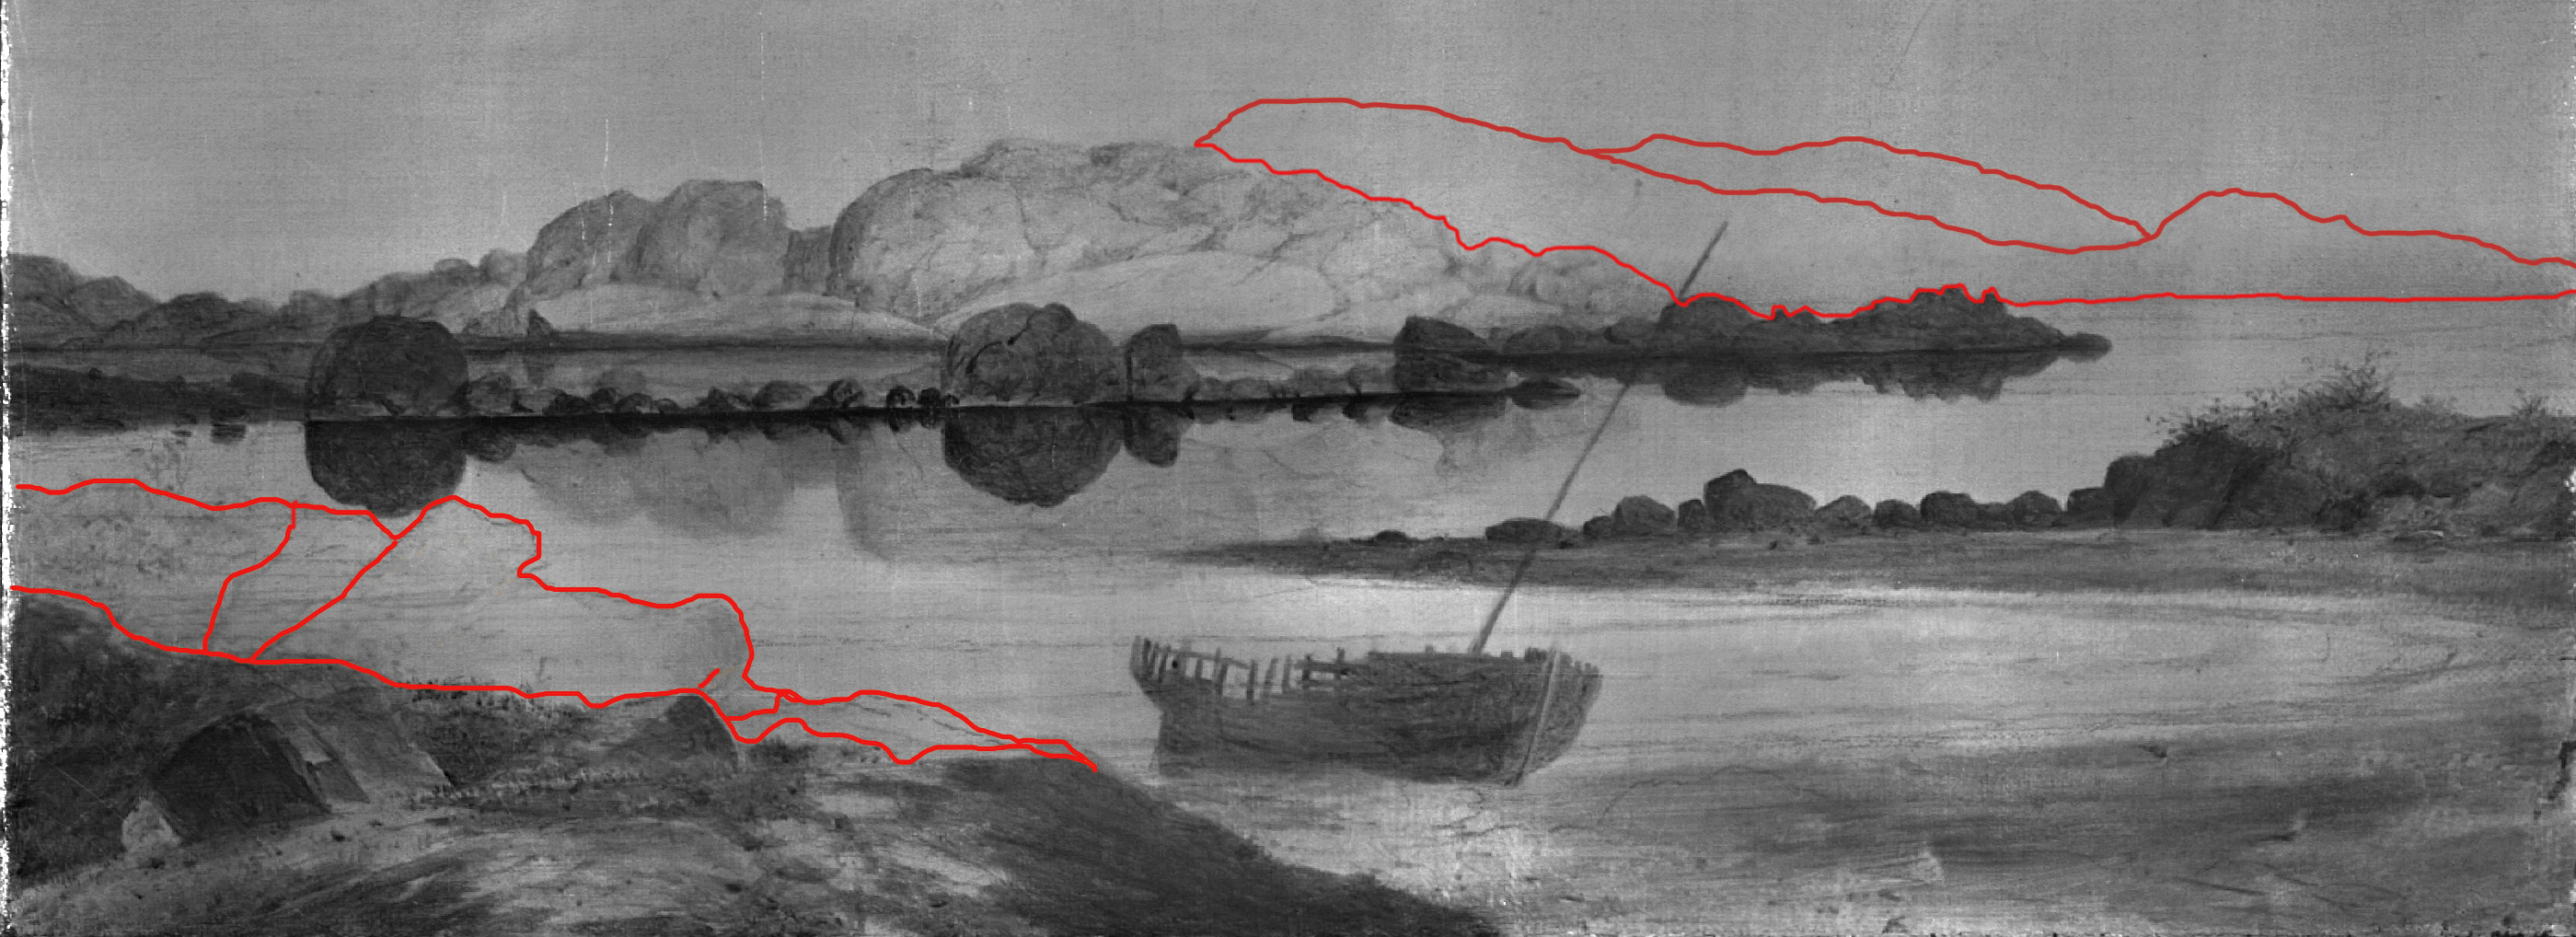 X-ray image with underdrawing of mountains and rocks highlighted.